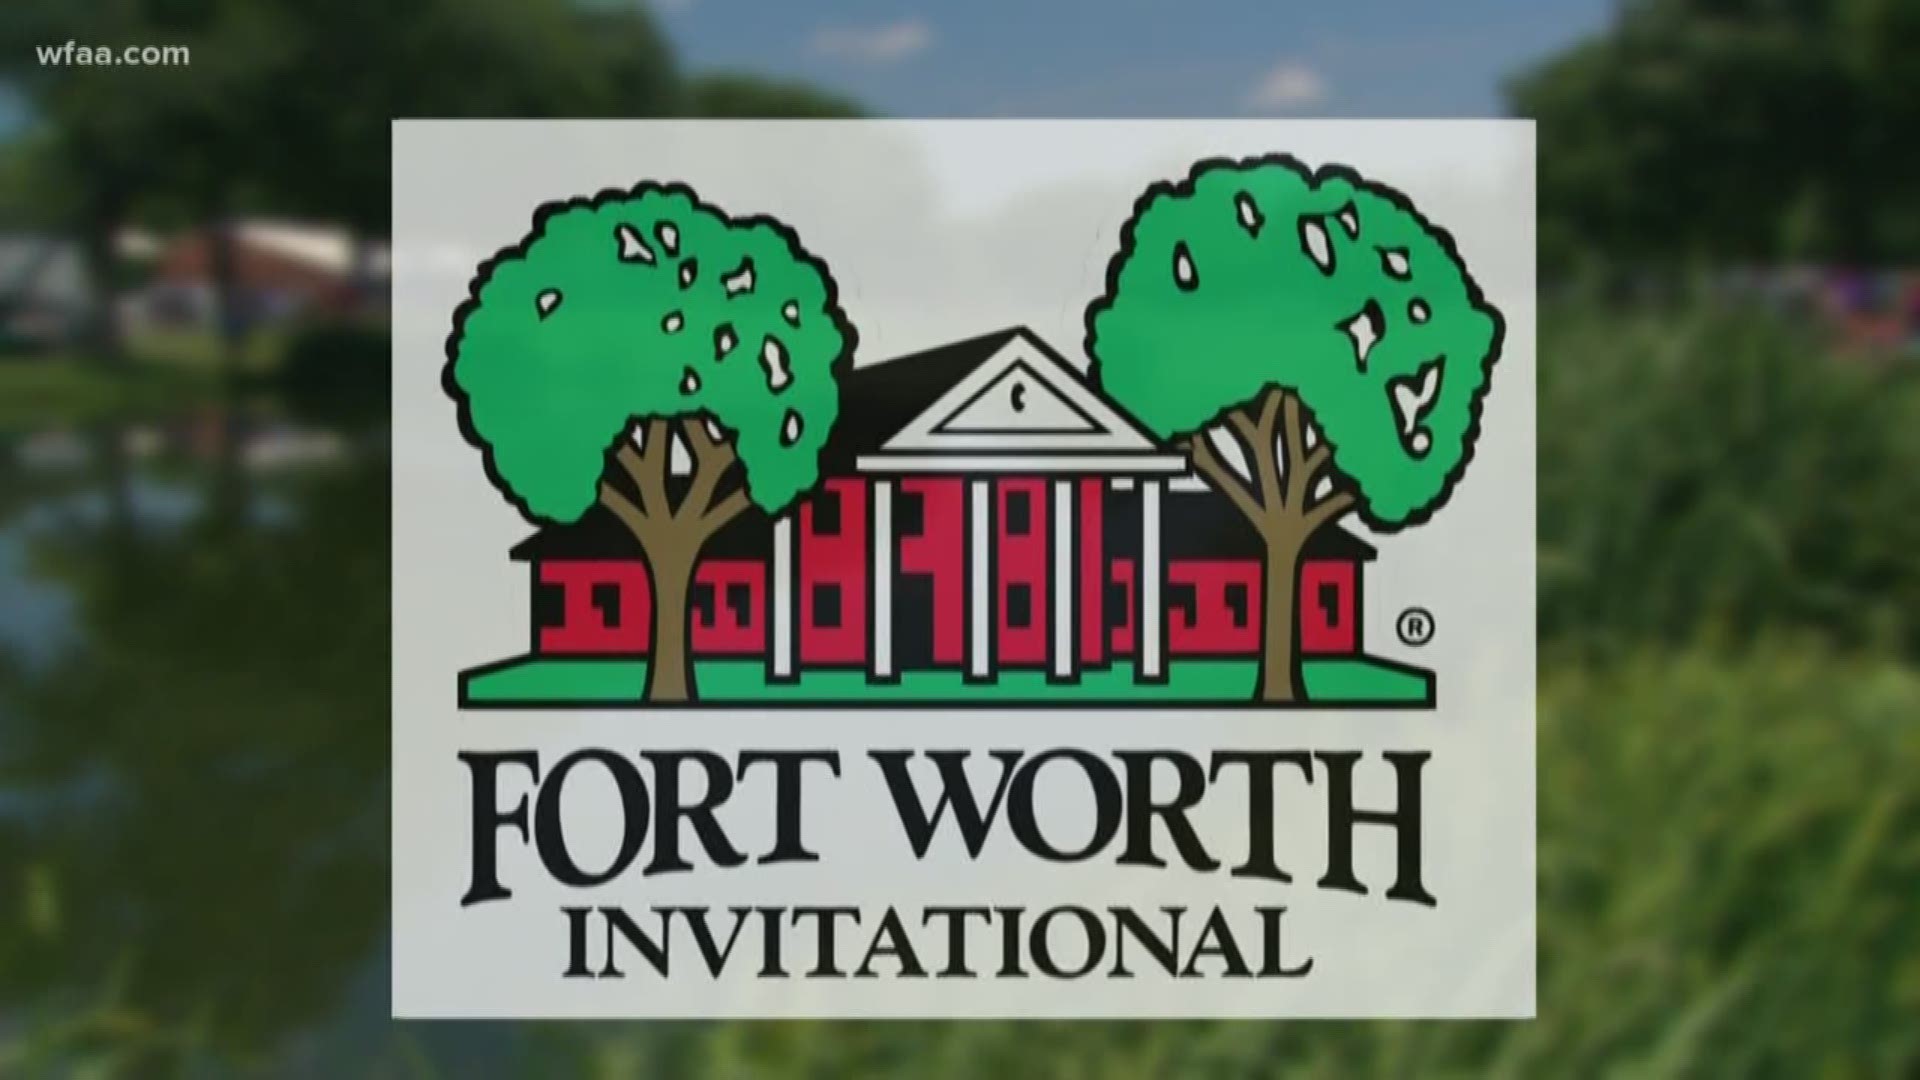 Colonial announces it's PGA tour stop will be called the Fort Worth Invitational in 2018. Now tournament officials focus on acquiring a new title sponsor moving forward.